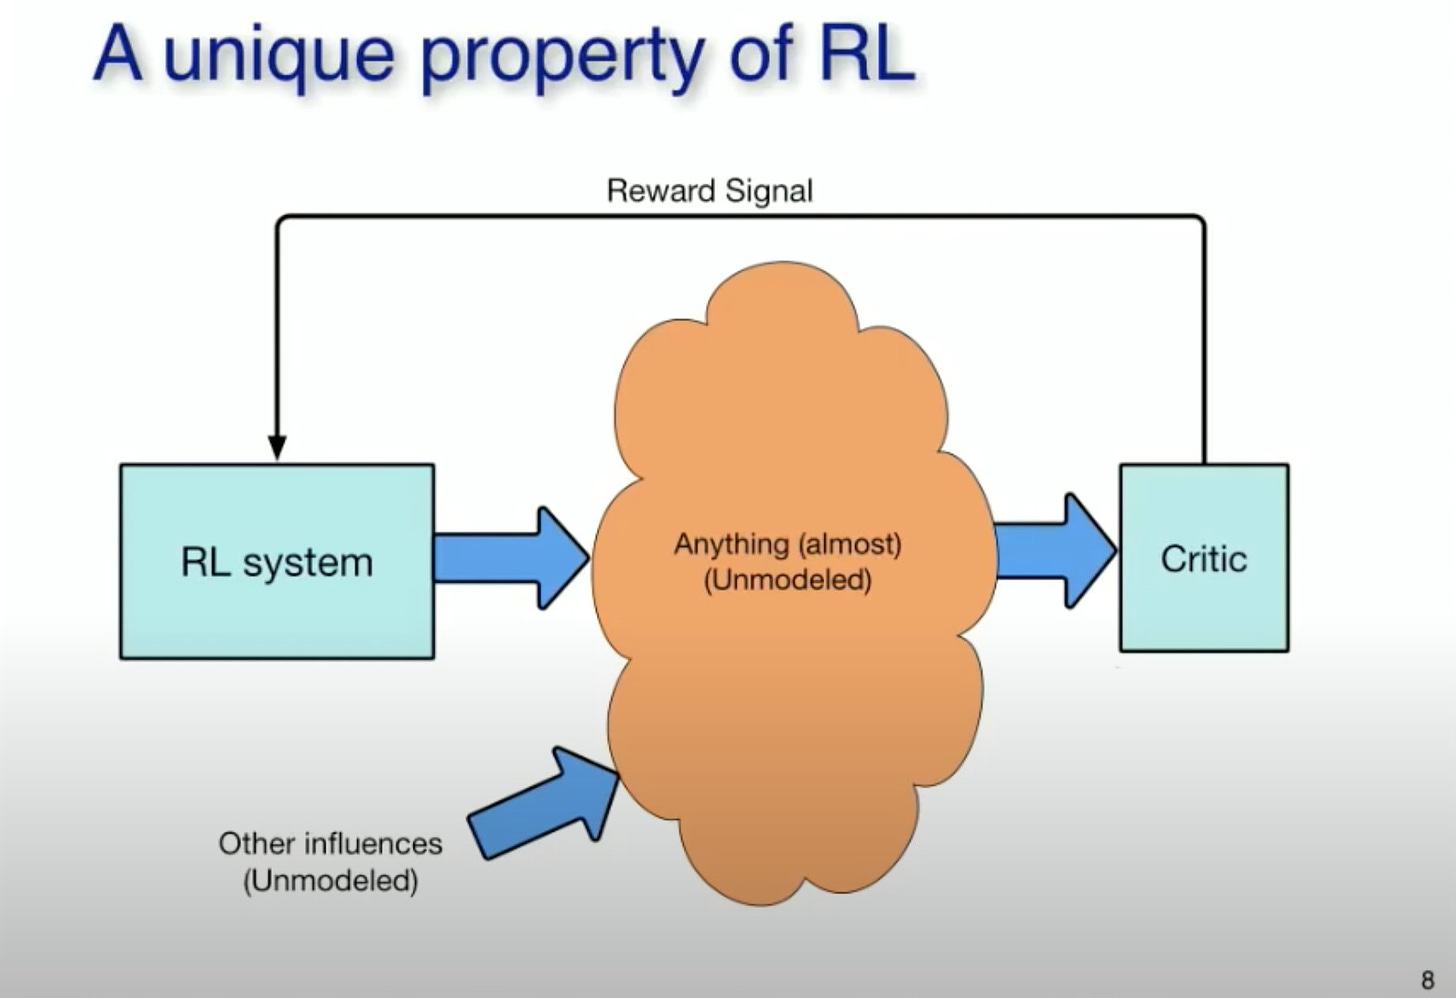 From a Talk from A.G. Barto on the History of RL.